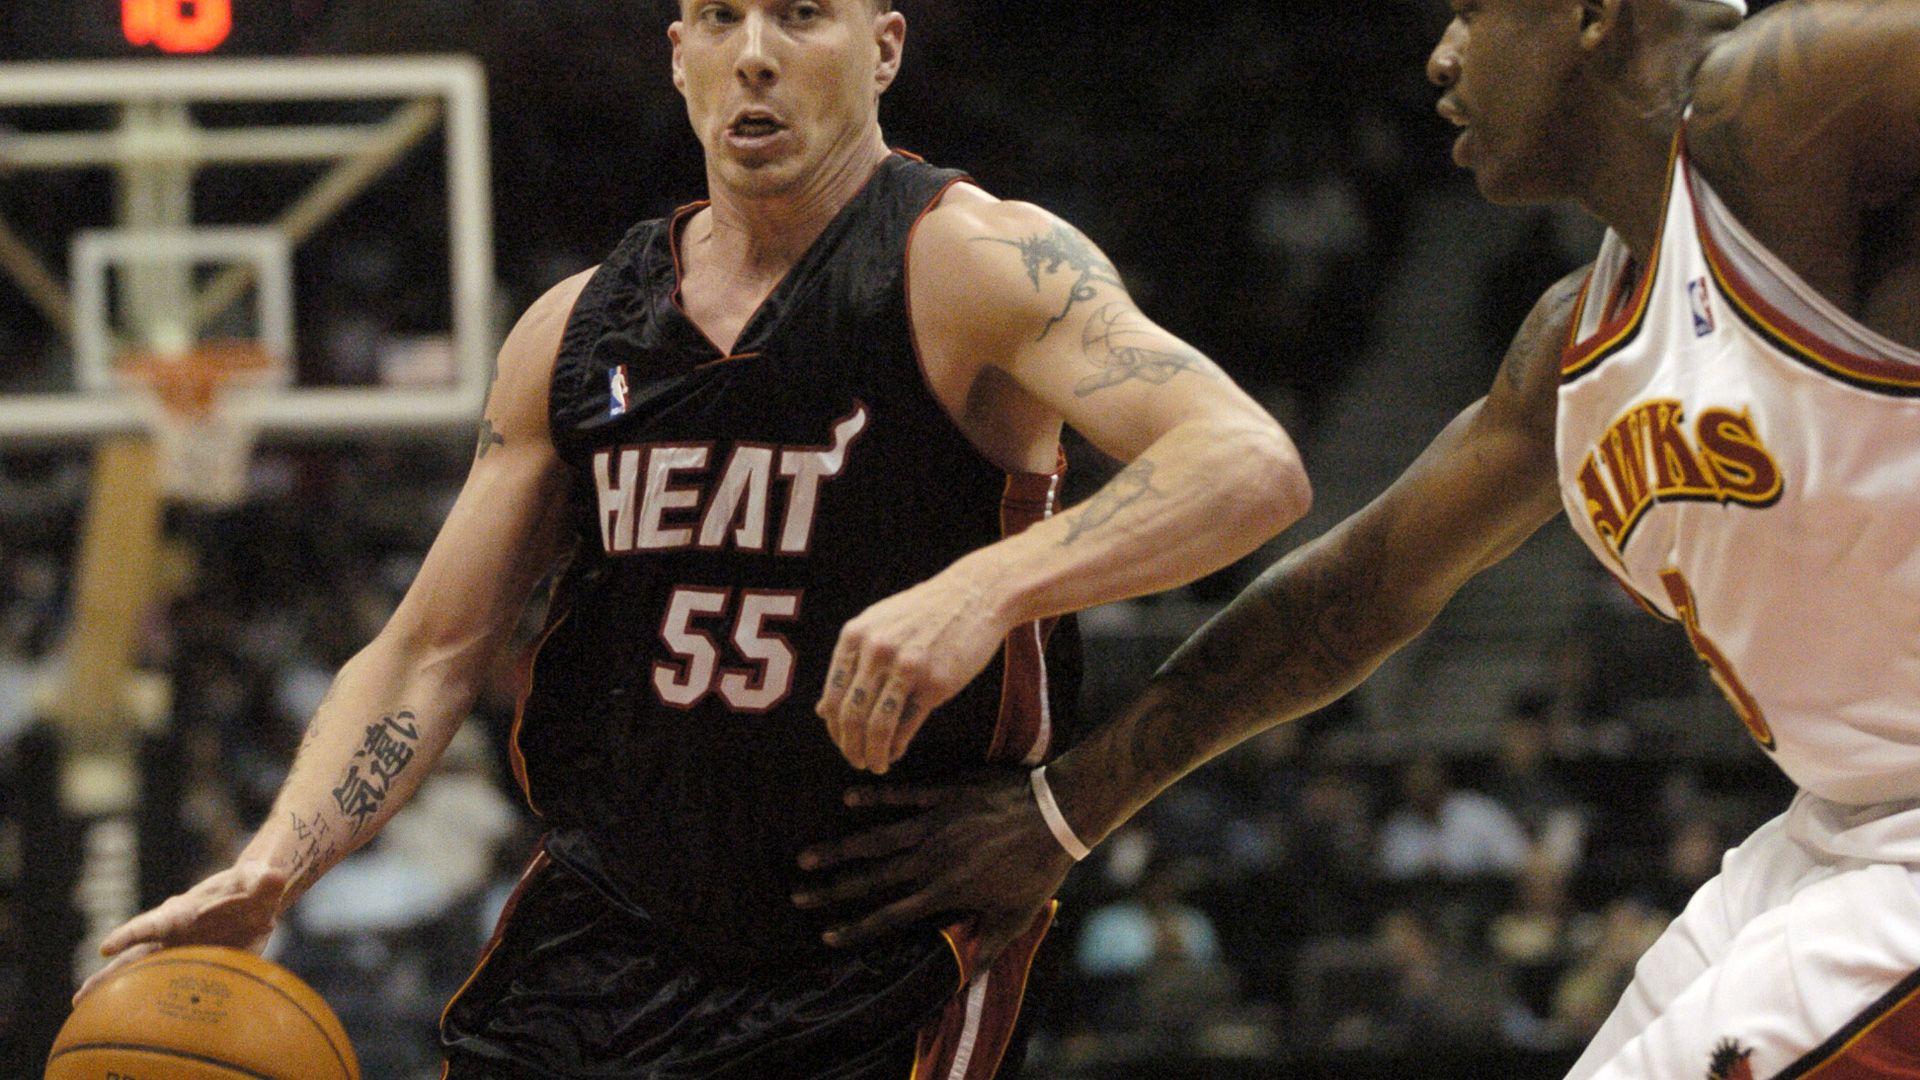 Throwback Thursday reminds us that Jason Williams was a magician